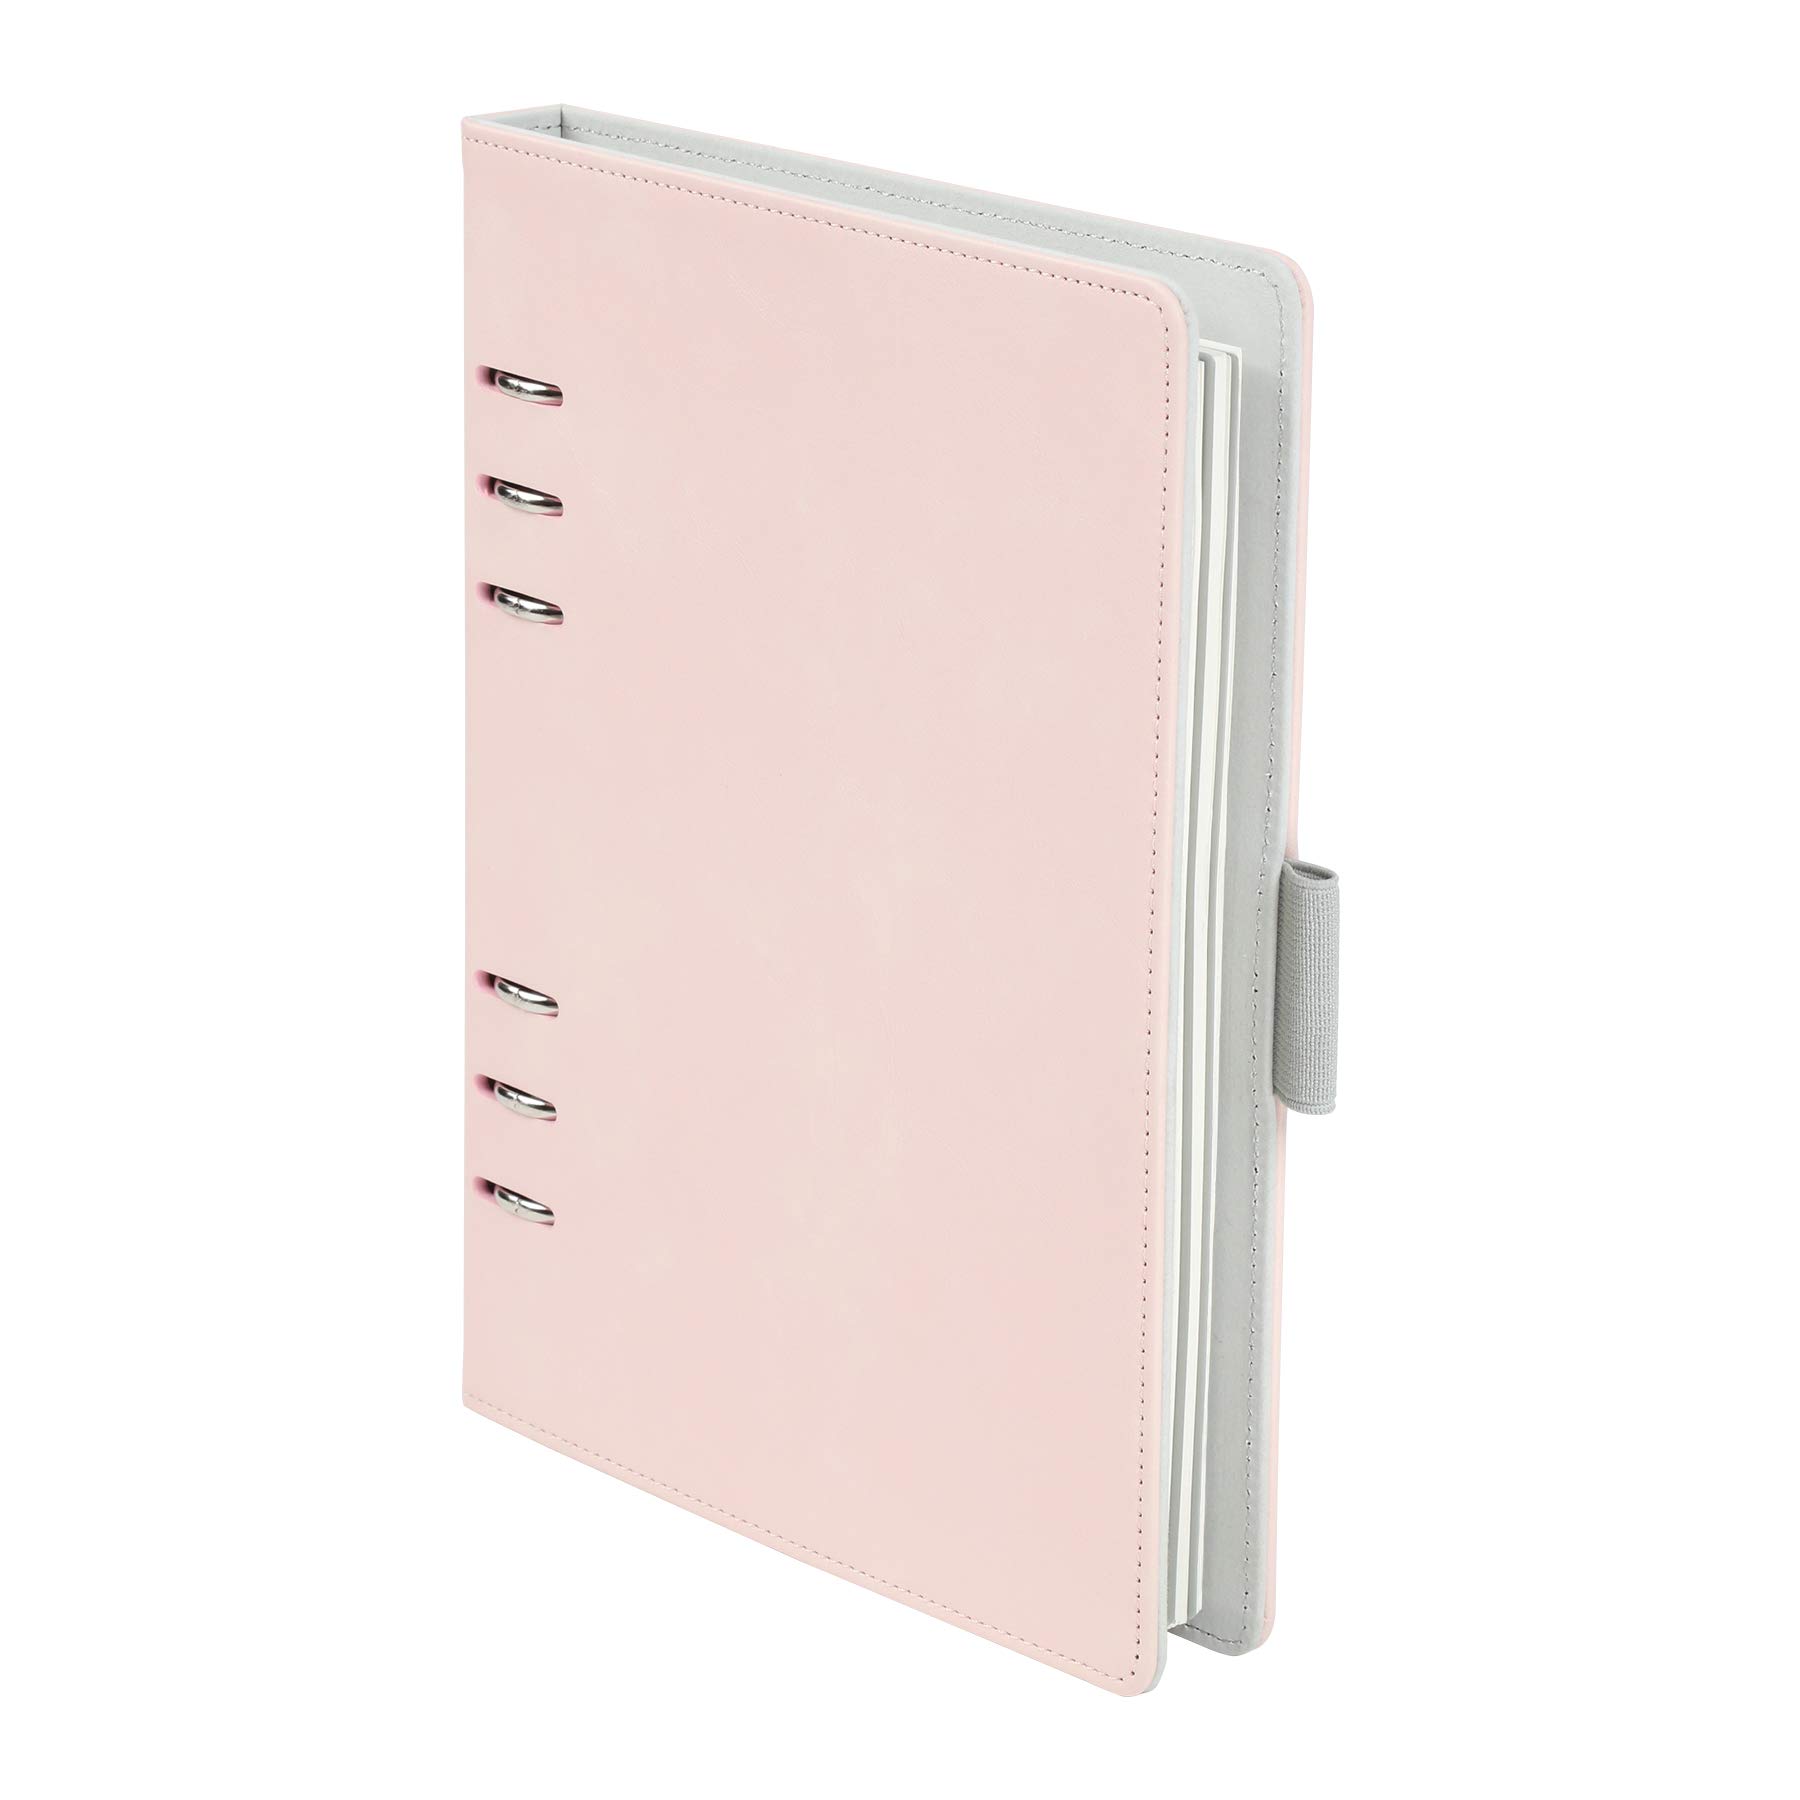 Oxford 6-Ring Professional Notebook, 7 X 9 Inch, Refillable Notebook, Ivory Paper, 100 Sheets, Blush Pink Faux Leather Cover (90